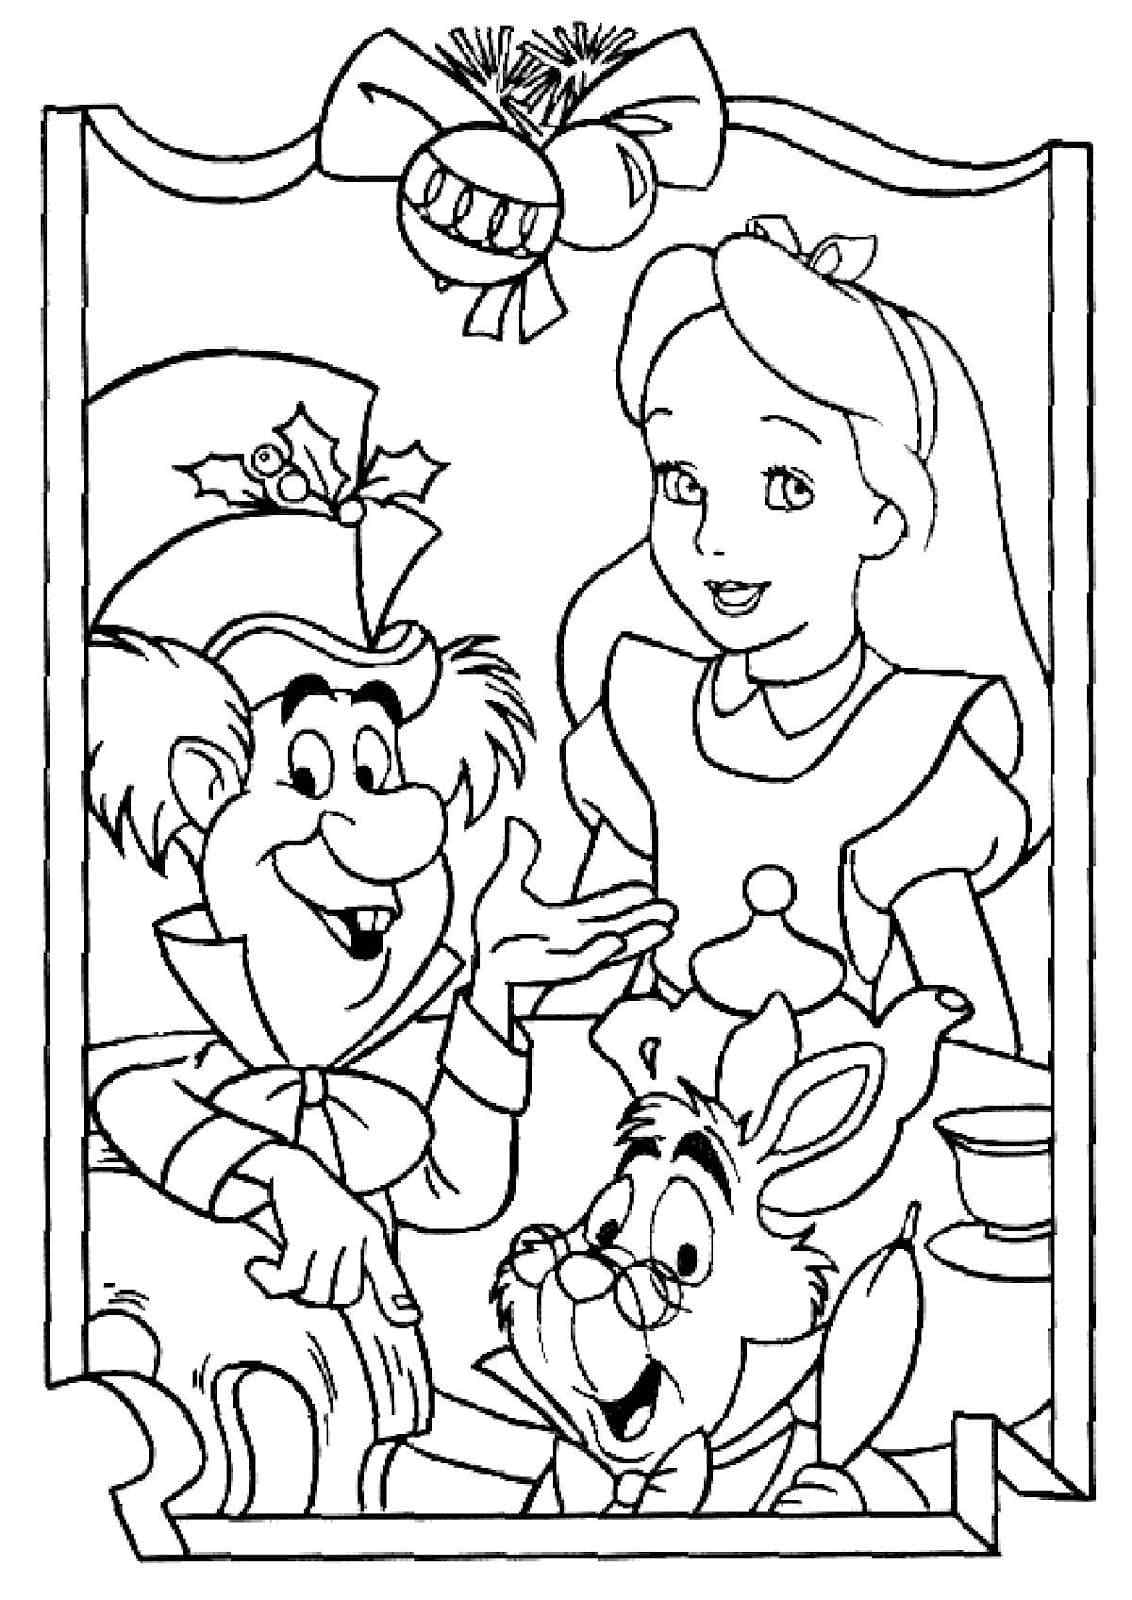 Merry Christmas With Princess Coloring Page